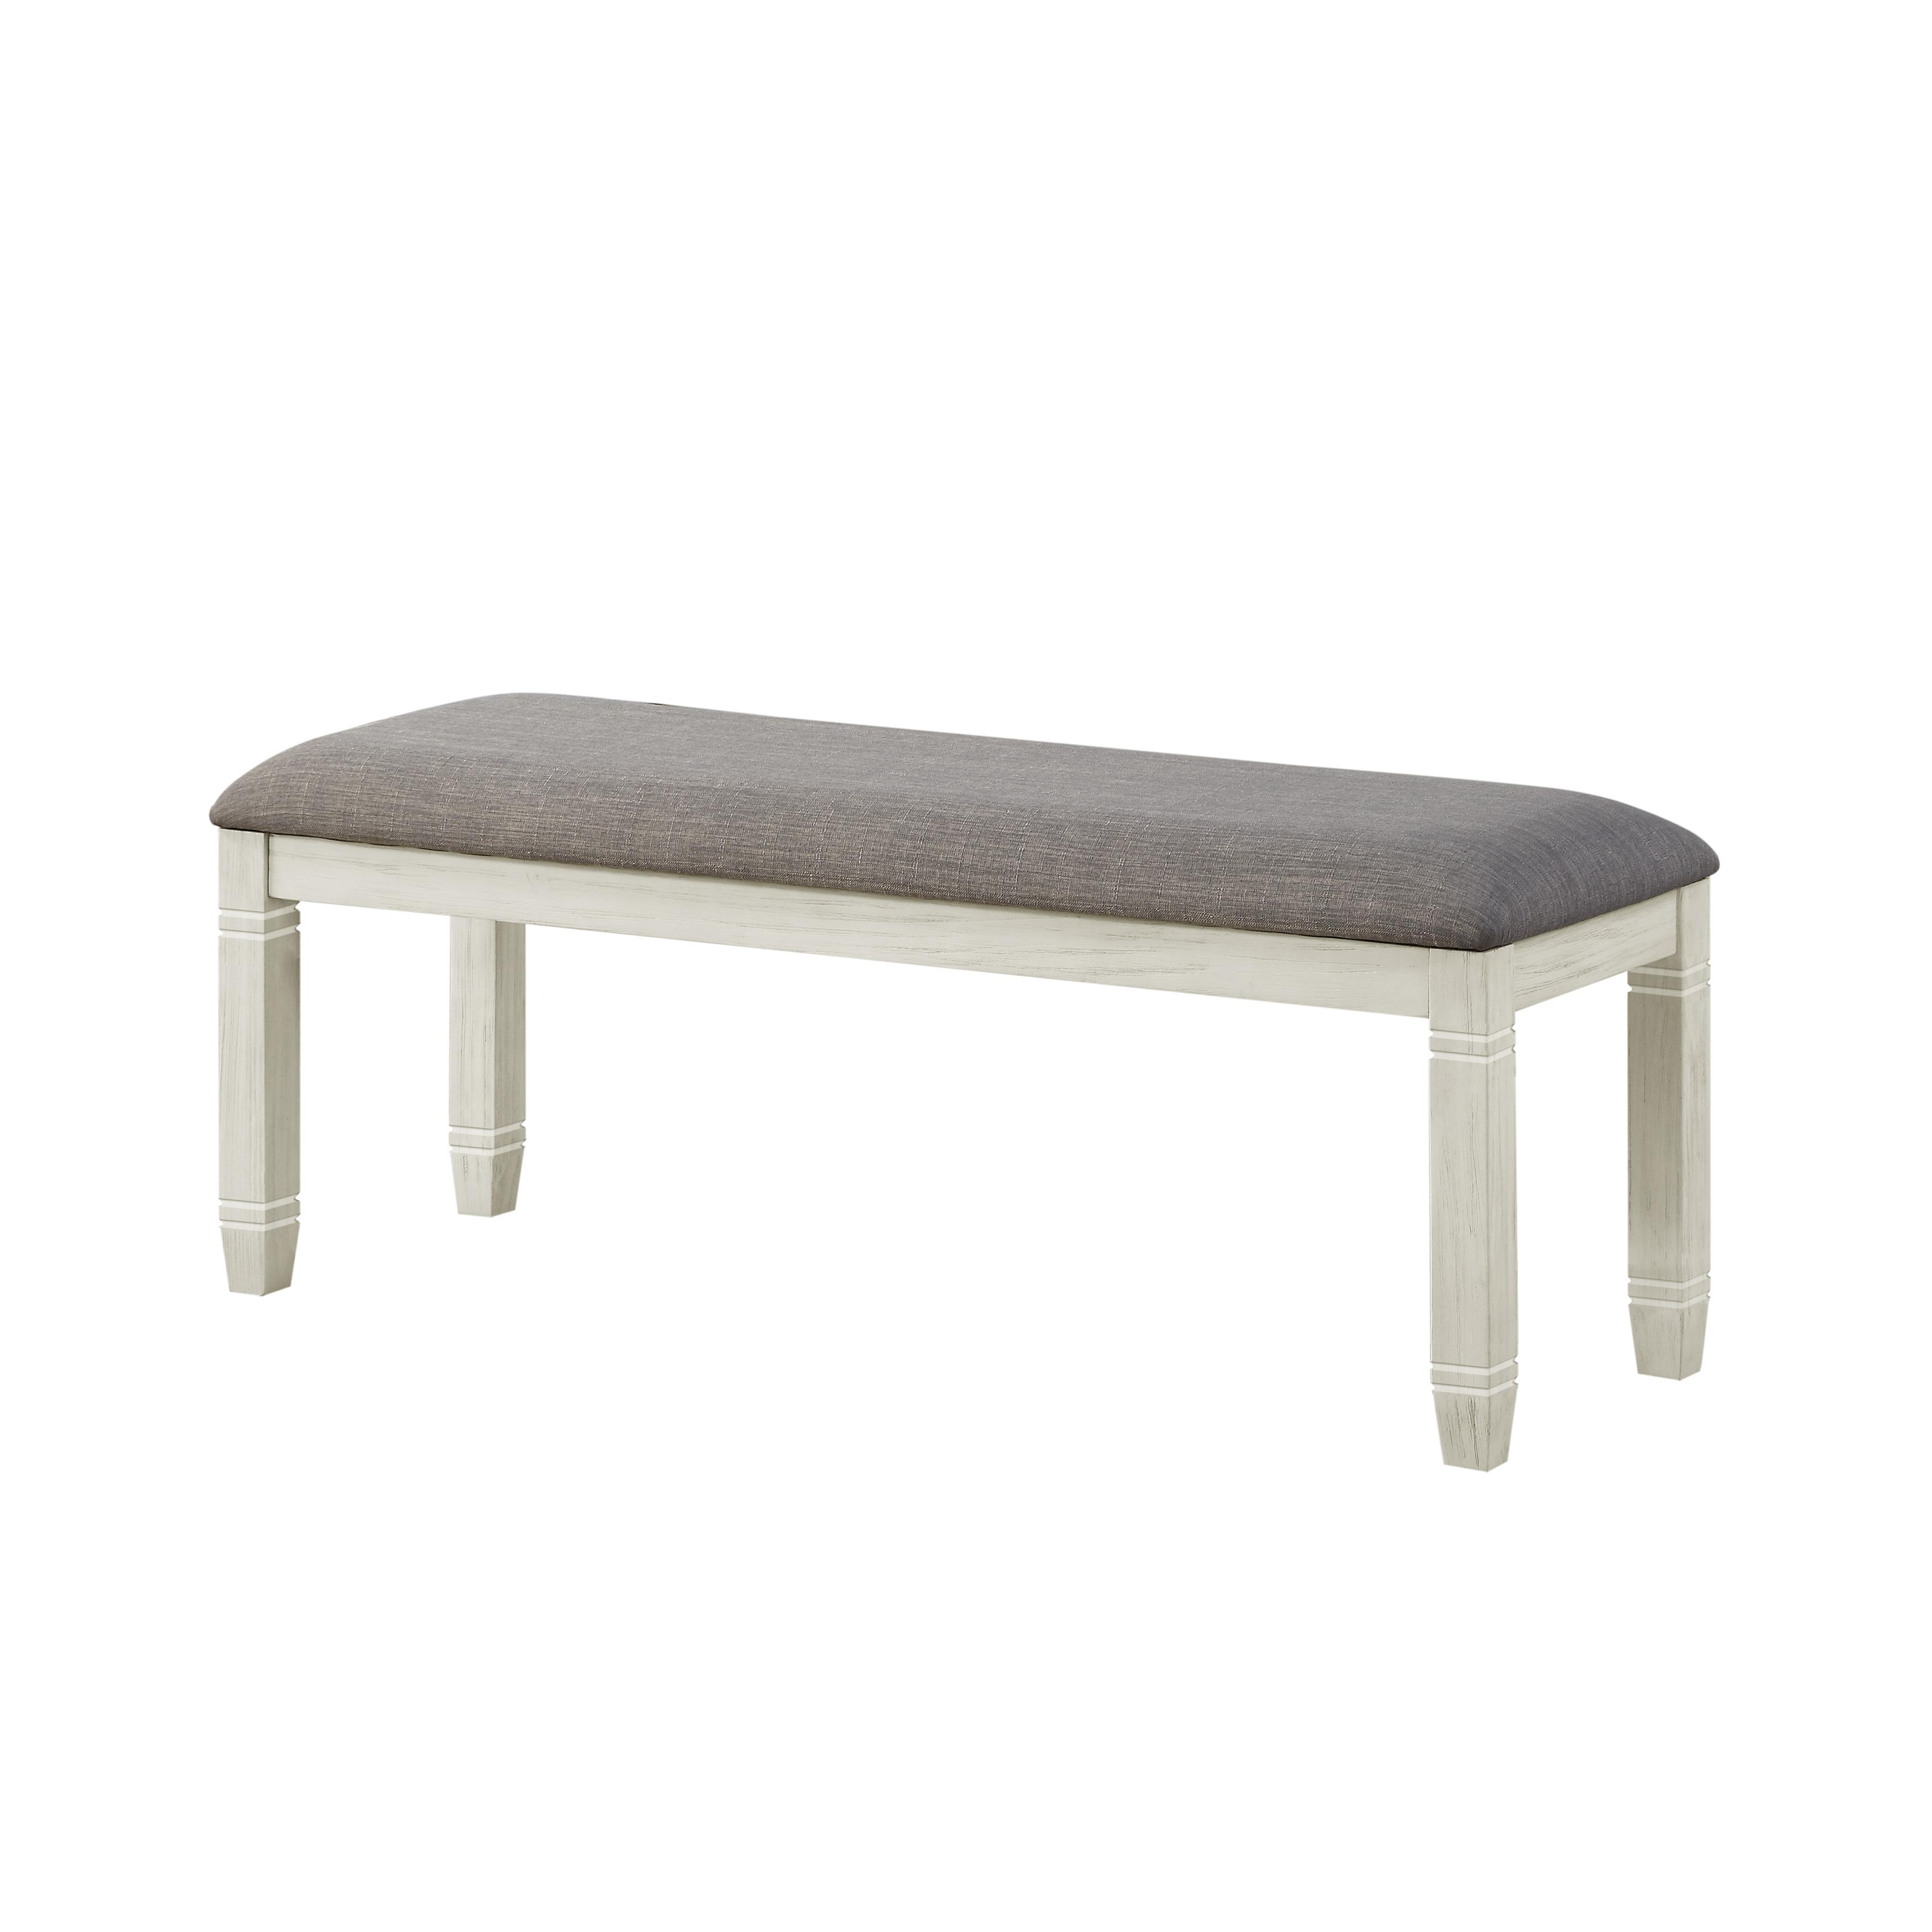 Casual Bench 5627NW-13 Granby 5627NW-13 in Antique White Polyester